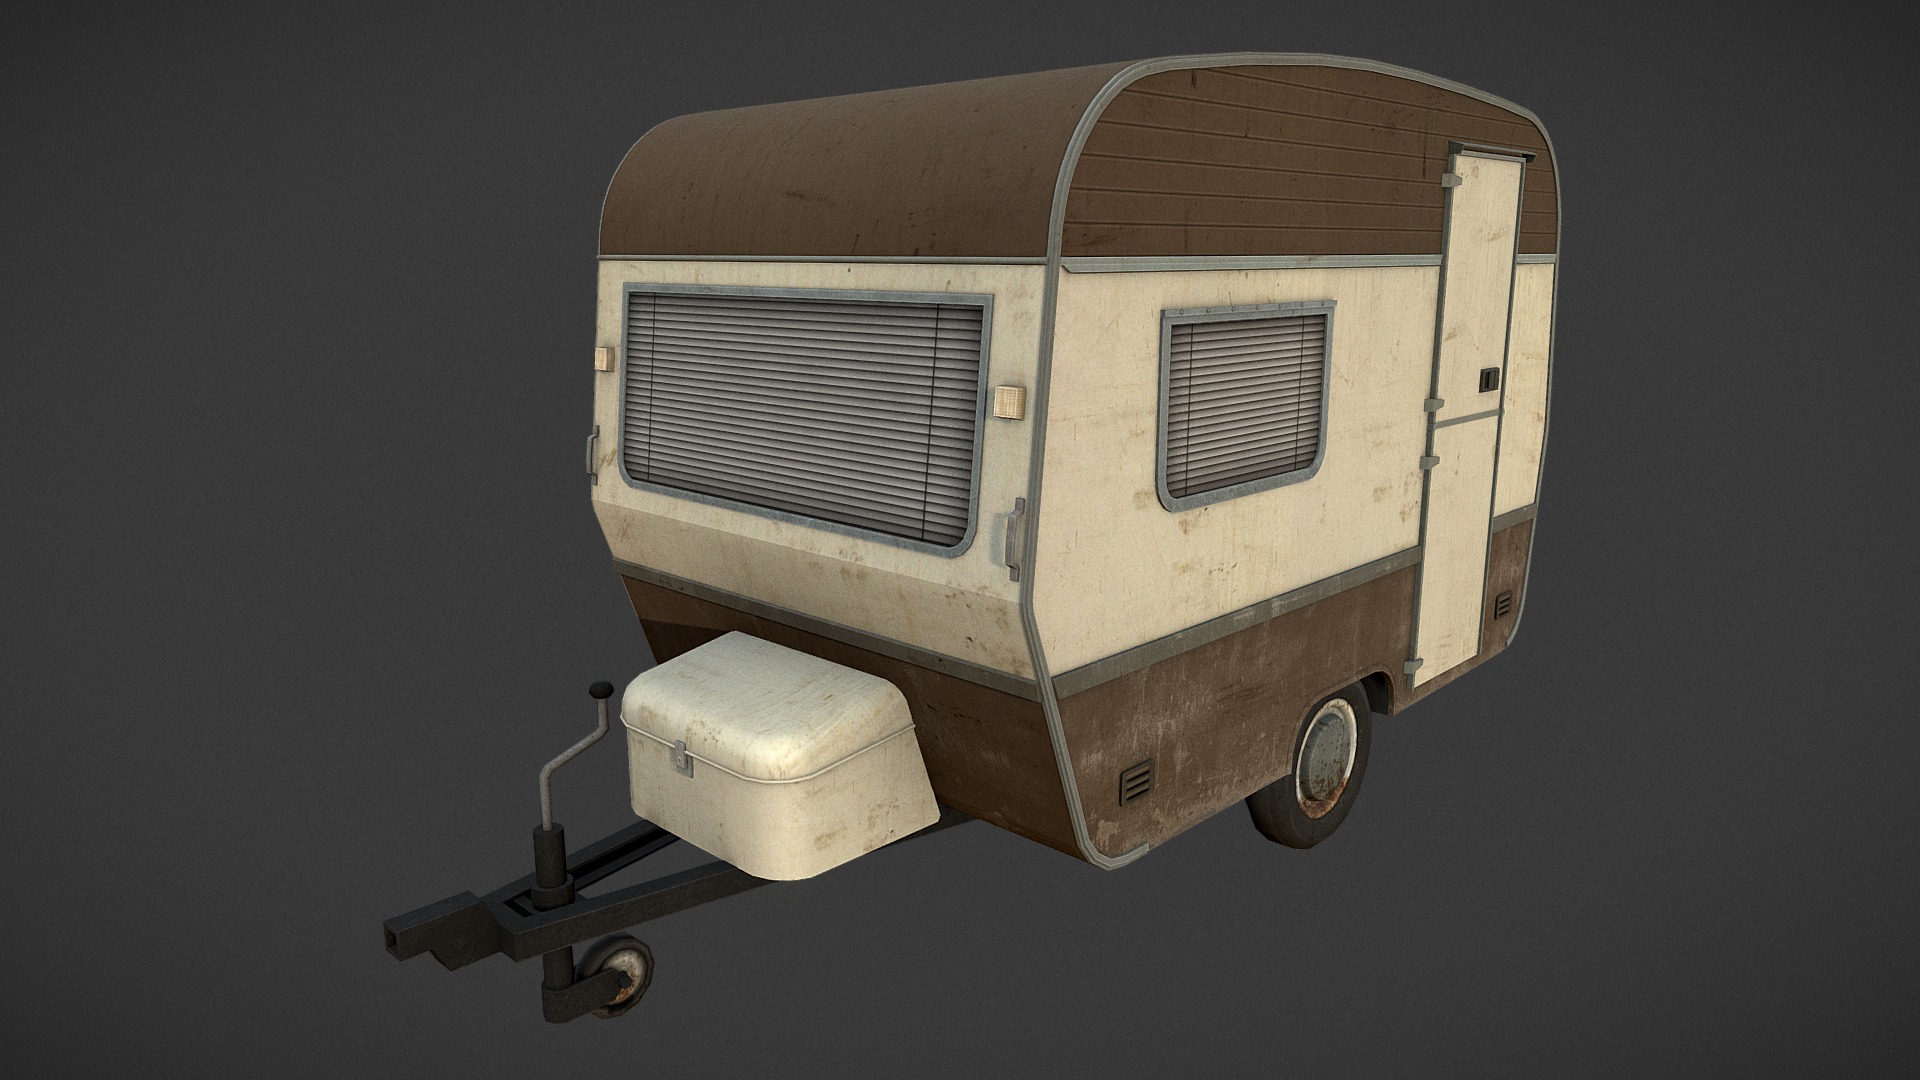 3D model Caravan Trailer - This is a 3D model of the Caravan Trailer. The 3D model is about a silver trailer with a metal frame.